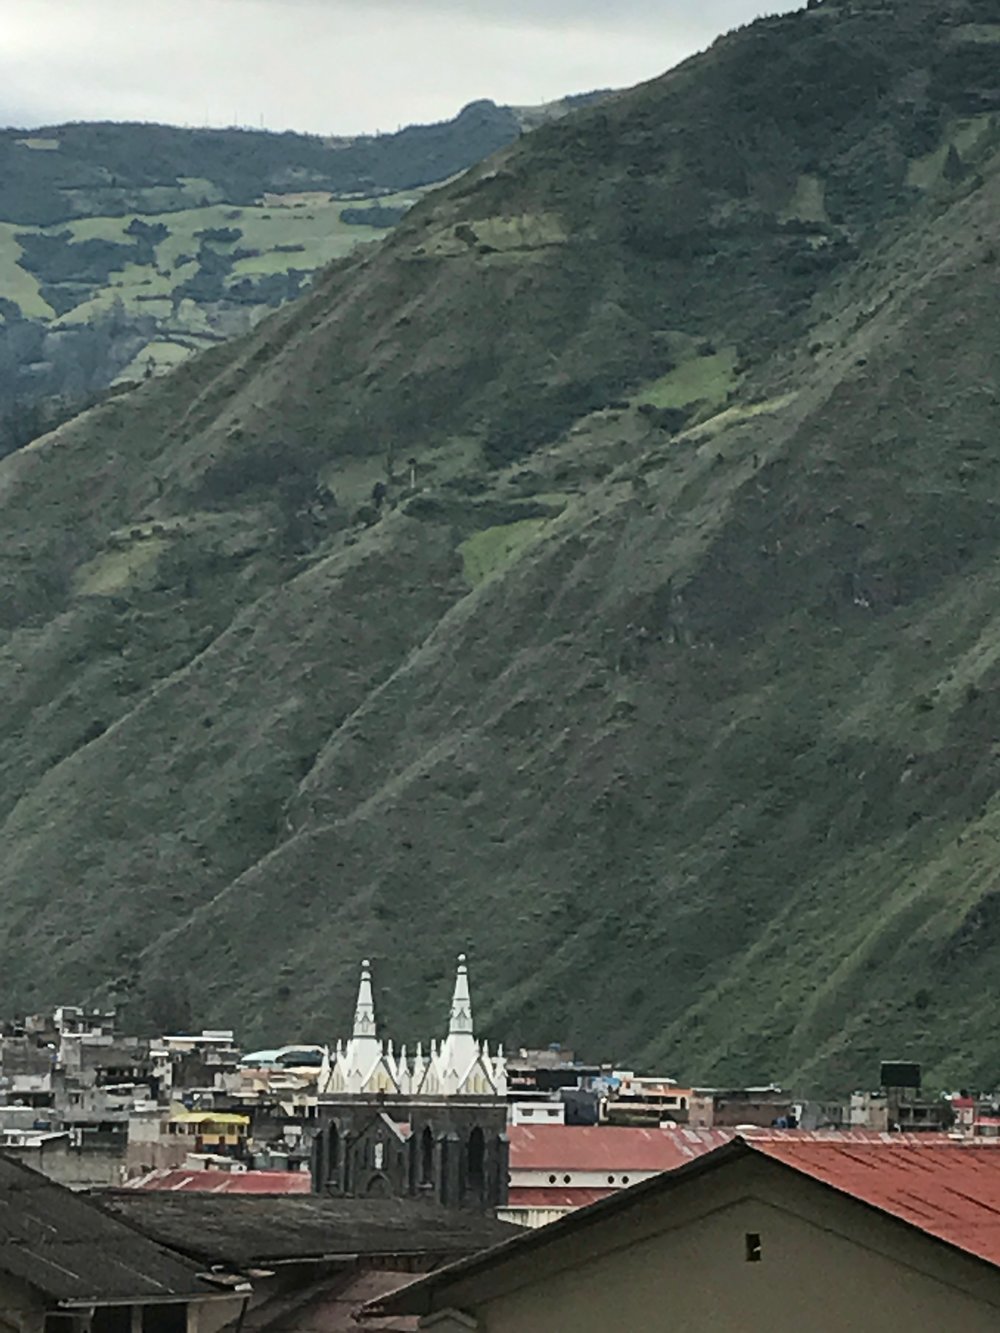 View of Baños from the hillside